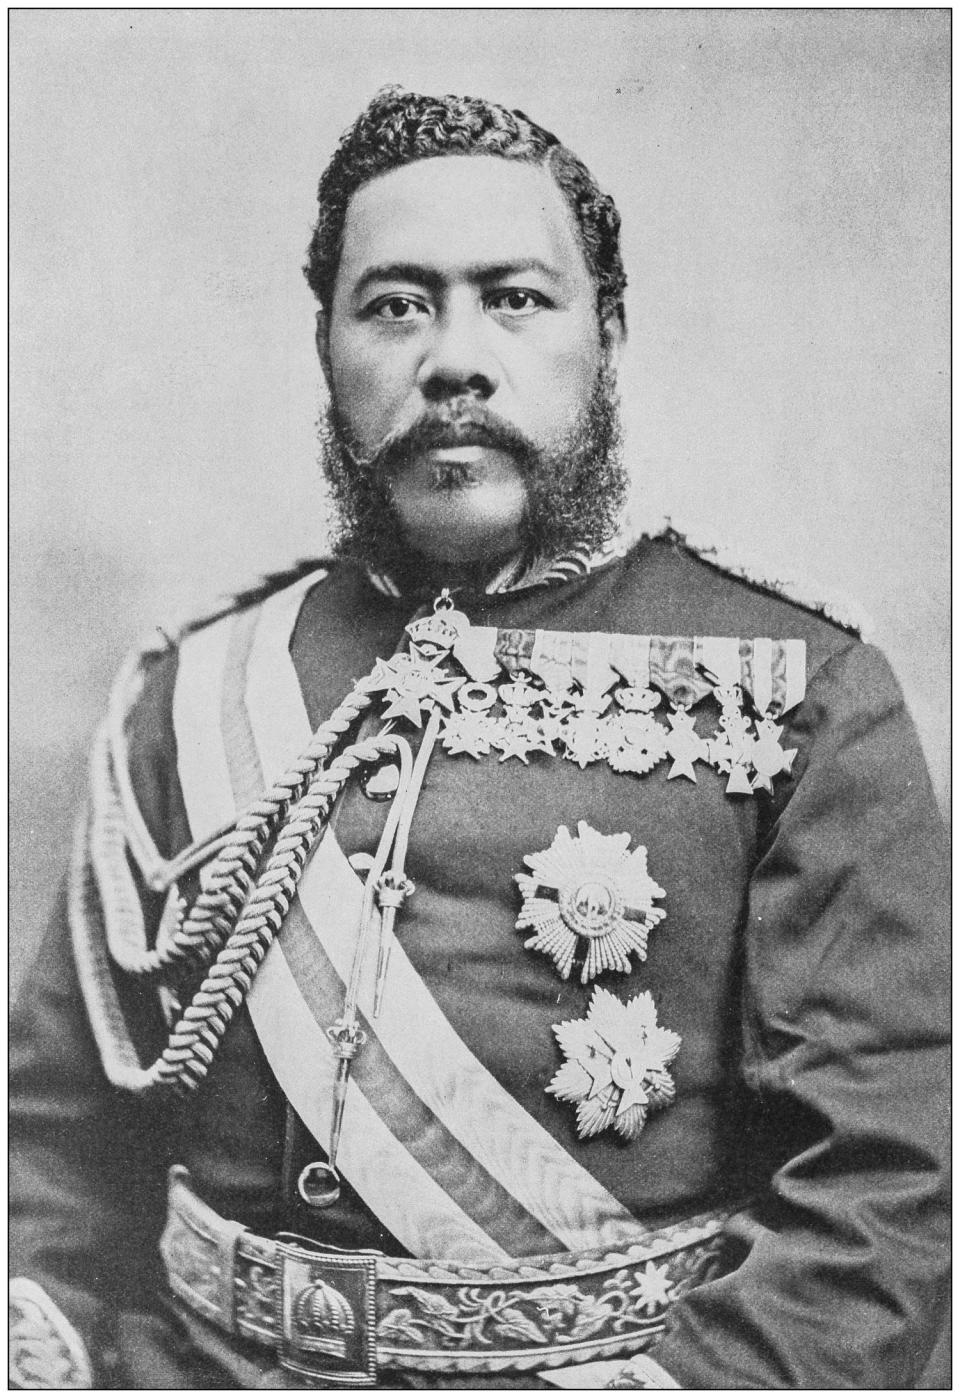 Antique historical photographs from the US Navy and Army: King Kalakaua I (ilbusca / Getty Images)